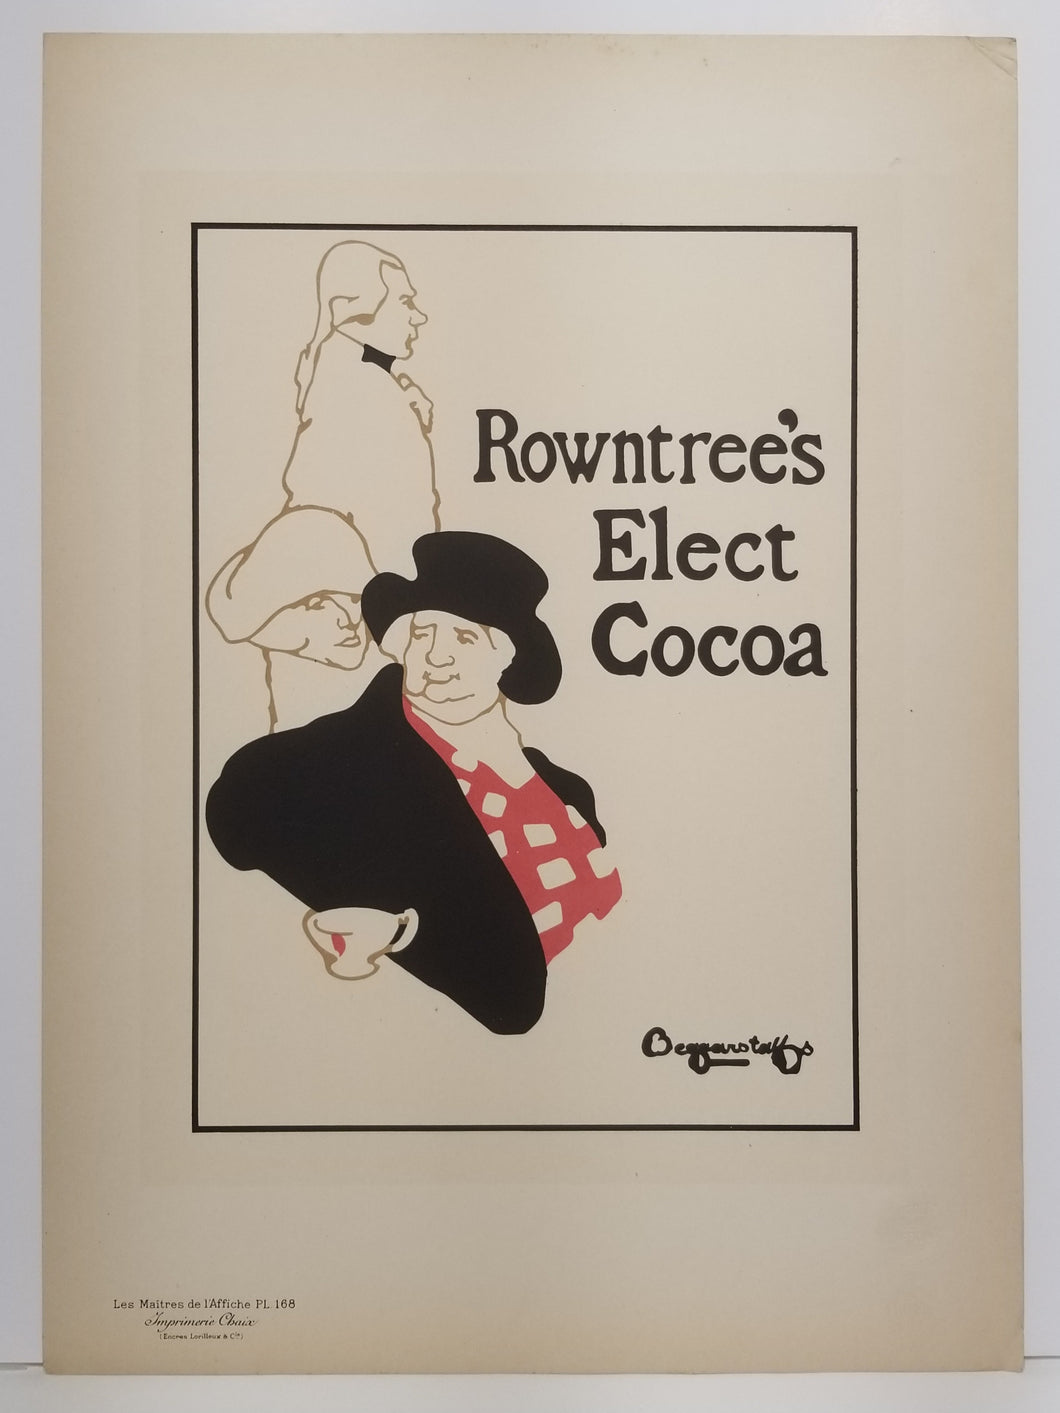 Rowntree's Elect Cocoa. 1899.